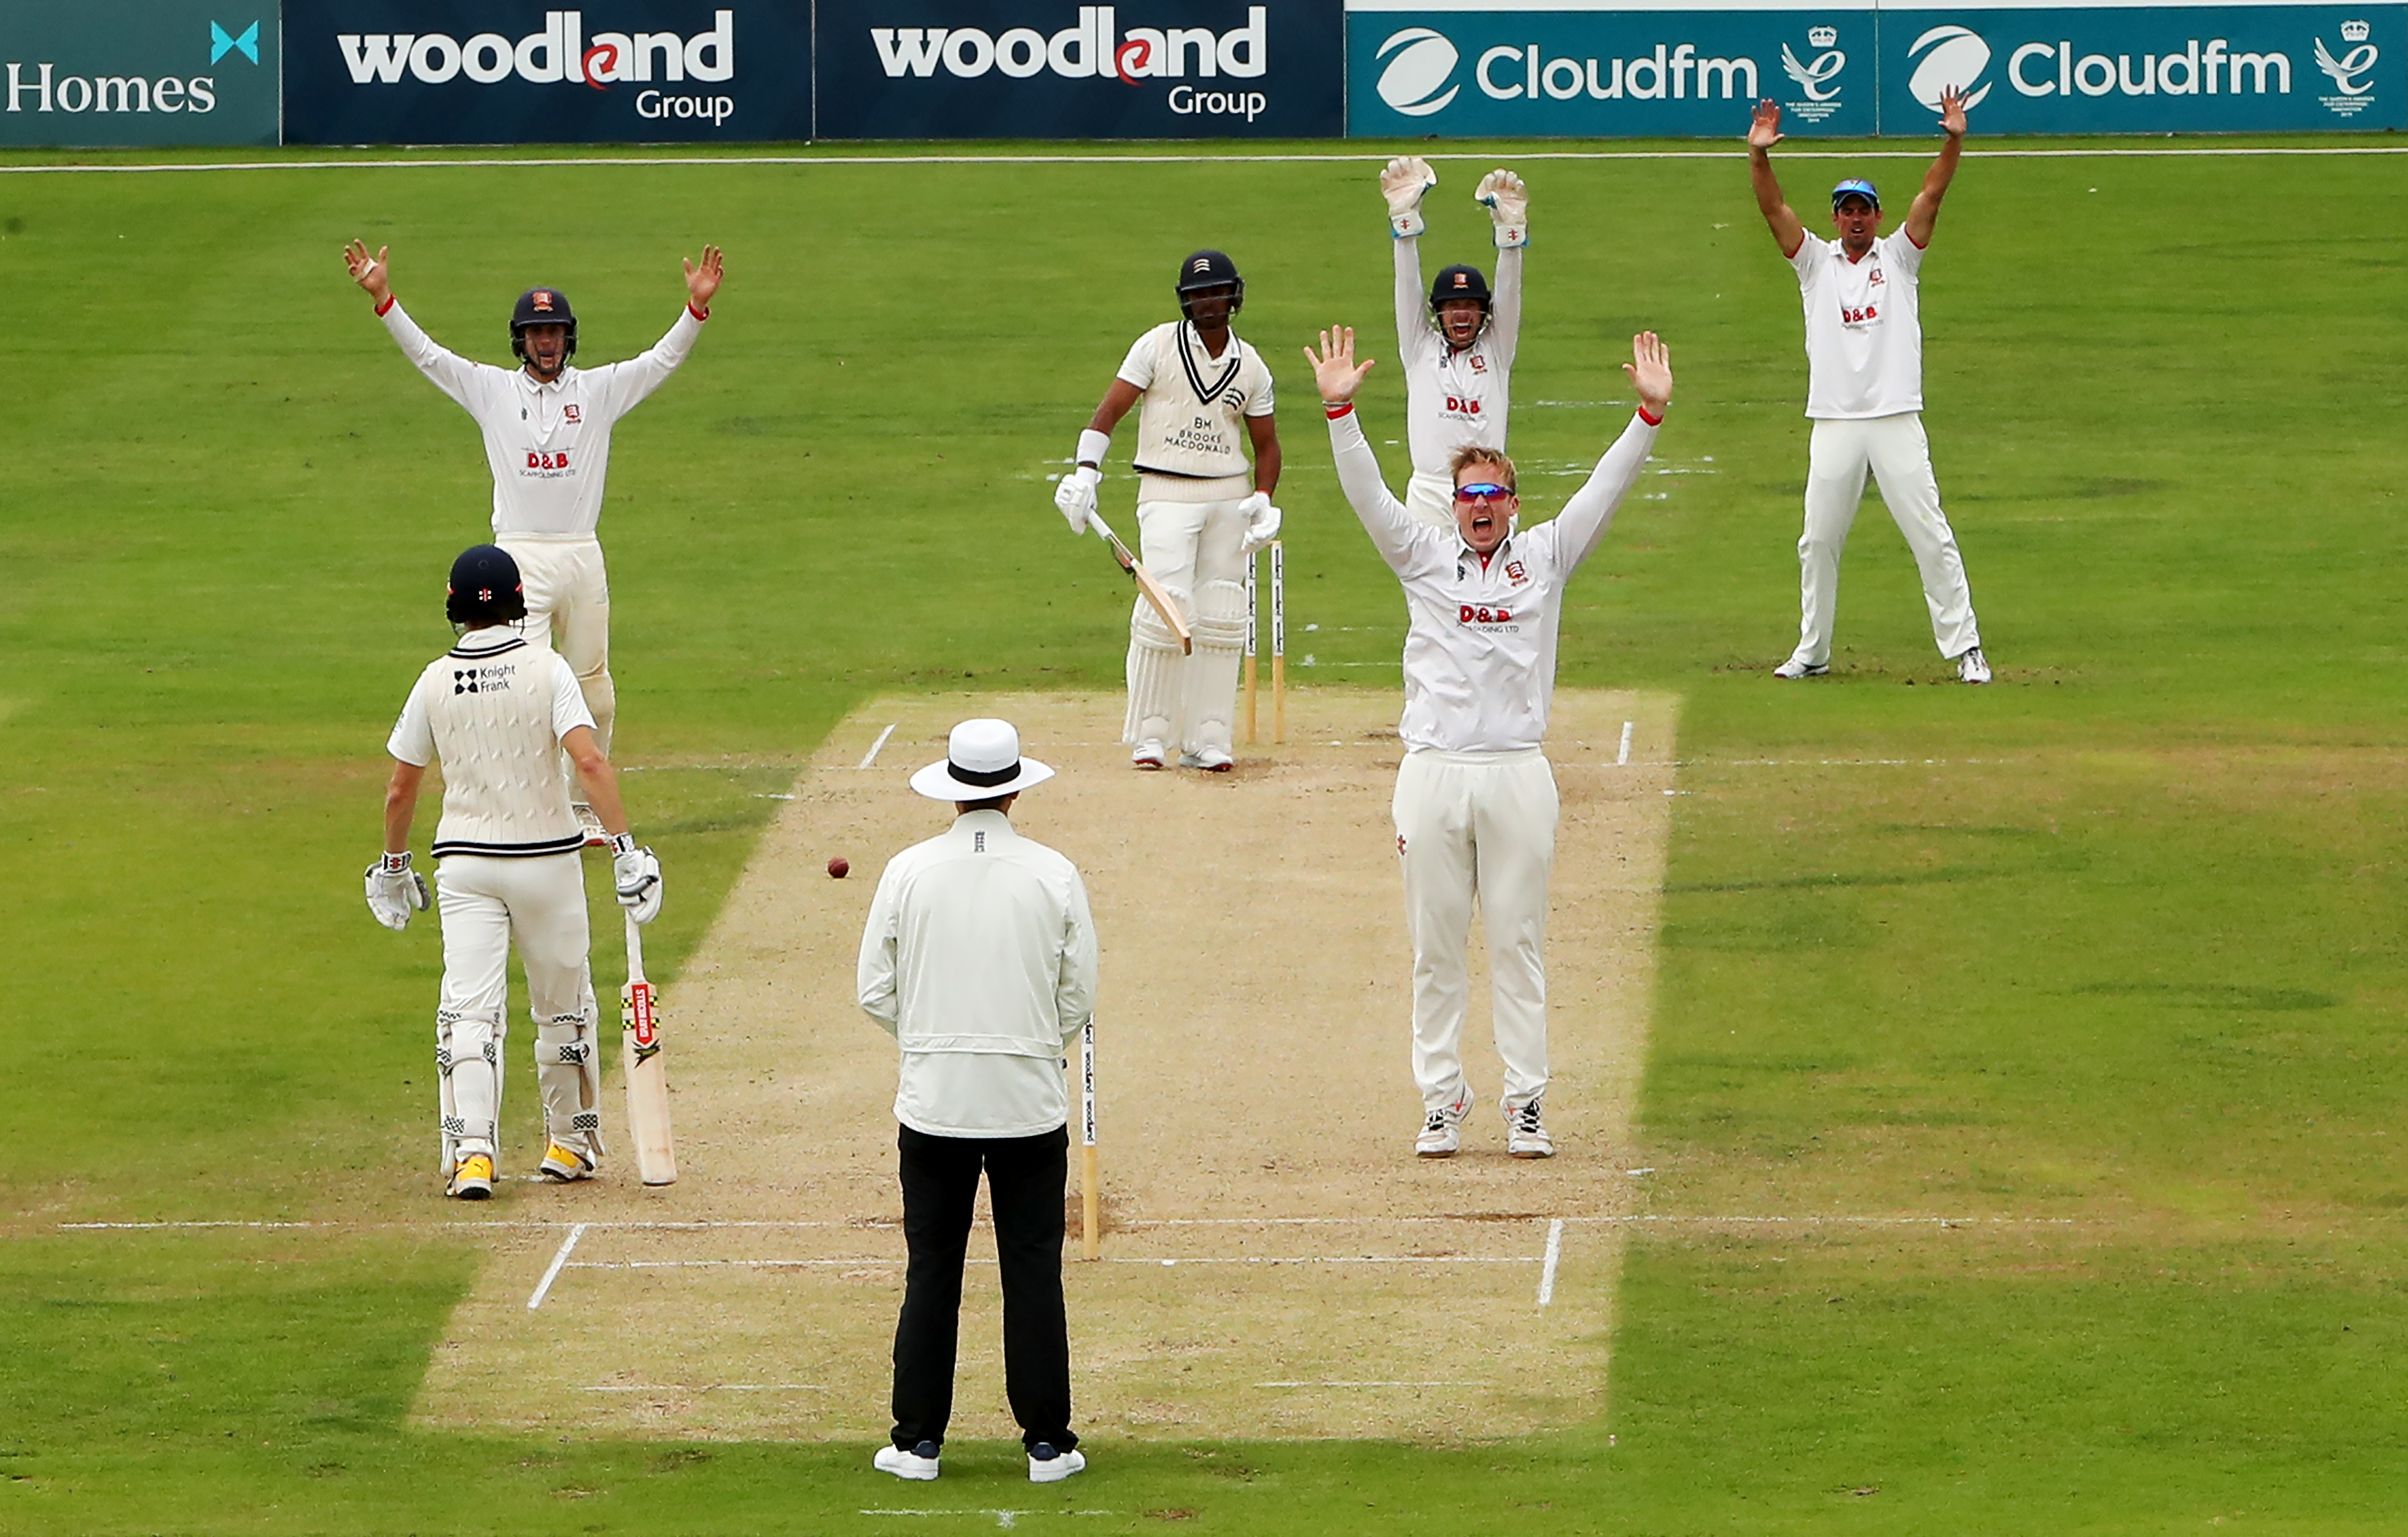 Simon Harmer appeals for the wicket of Thilan Walallawita during DayThree of the Bob Willis Trophy match between Essex and Middlesex at The Cloudfm County Ground on September 8